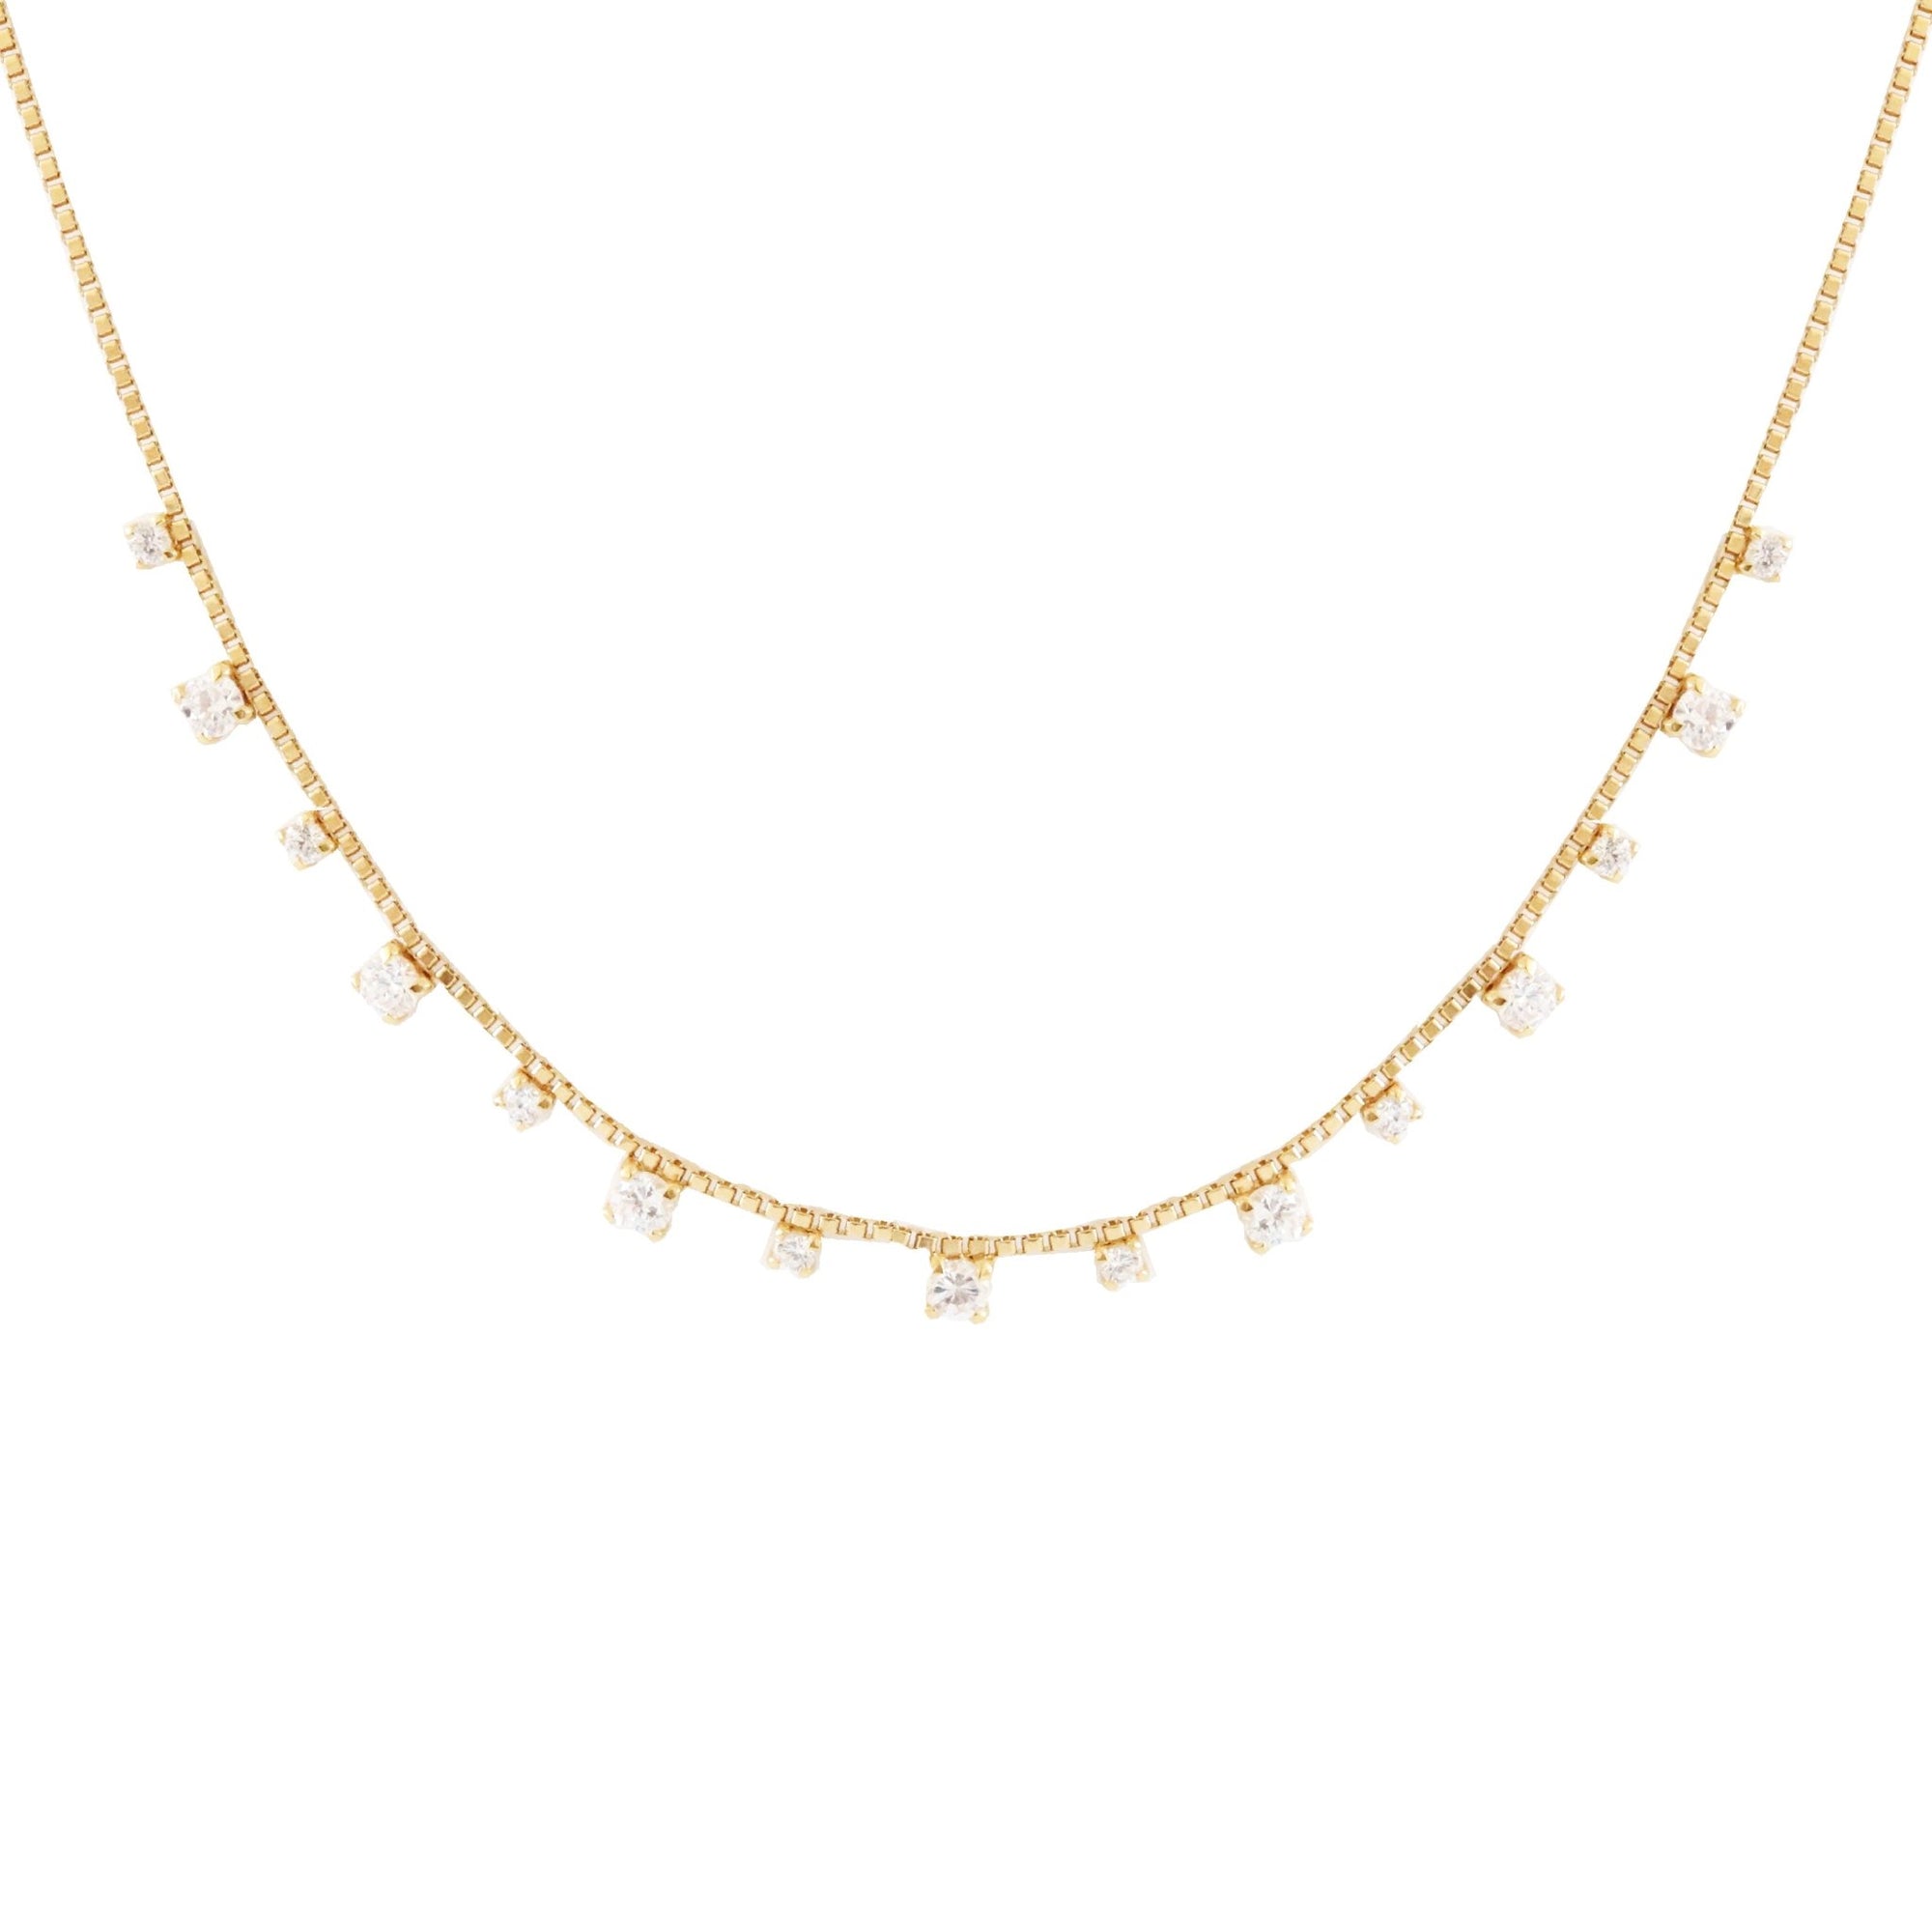 SCATTERED LOVE COLLAR NECKLACE - CUBIC ZIRCONIA & GOLD - SO PRETTY CARA COTTER